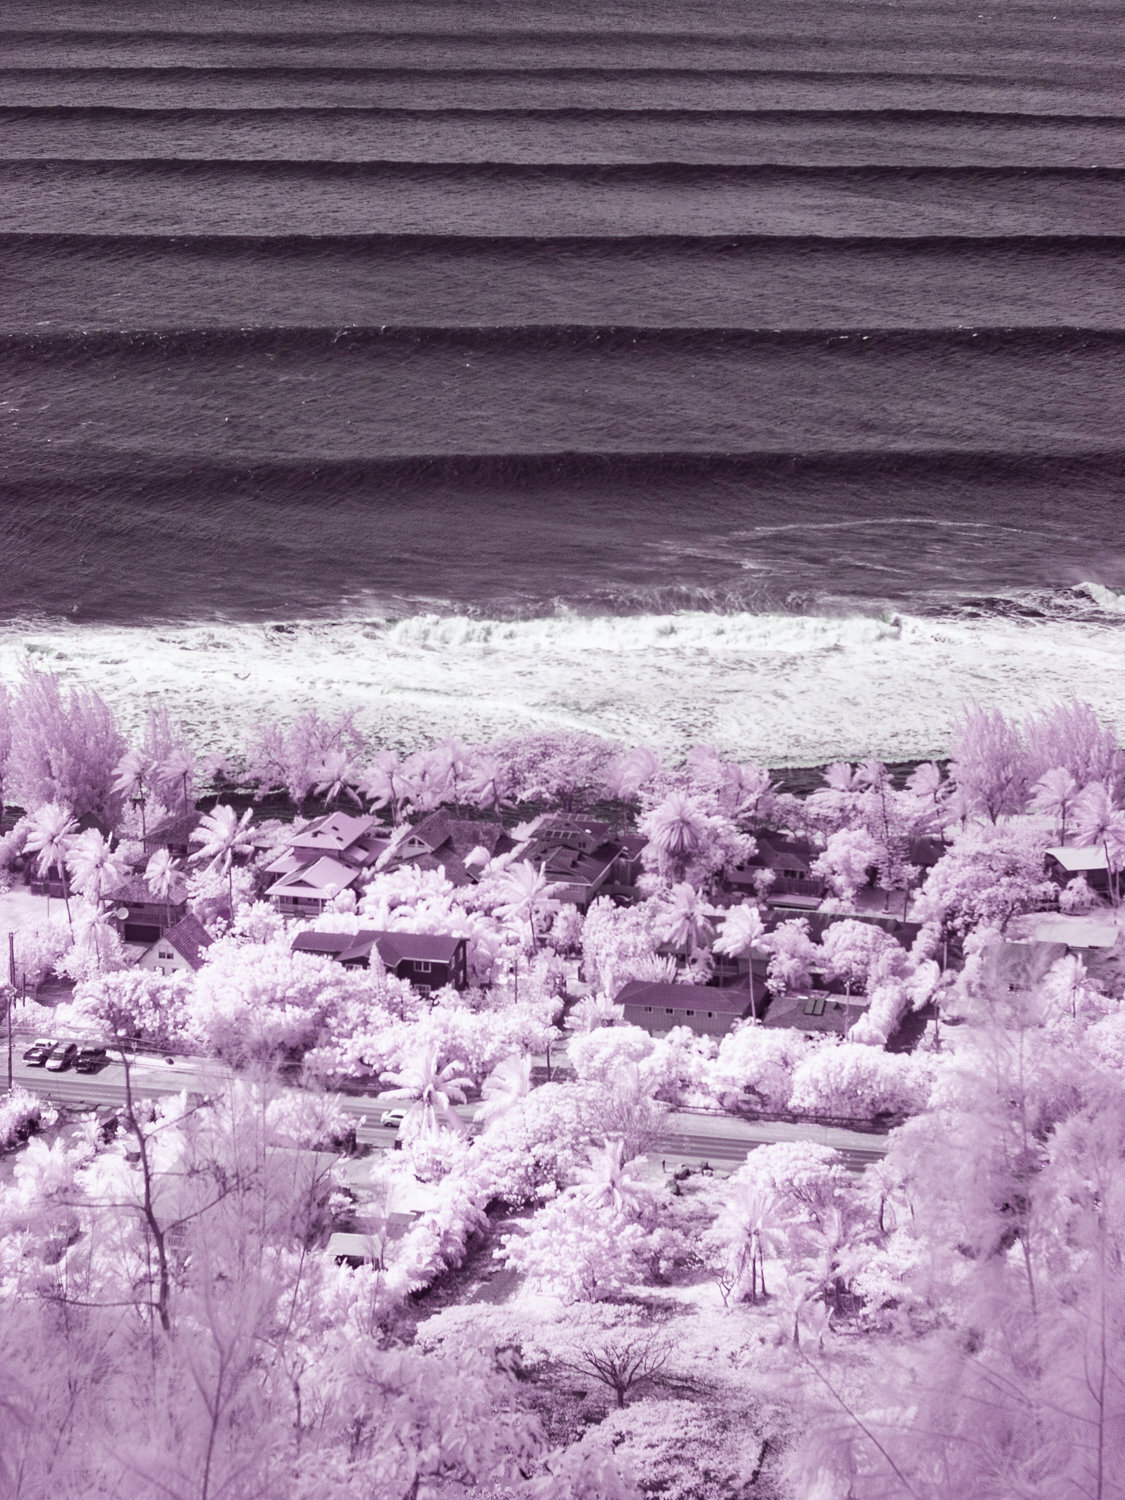 North Shore, Oahu, Hawaii in Infrared